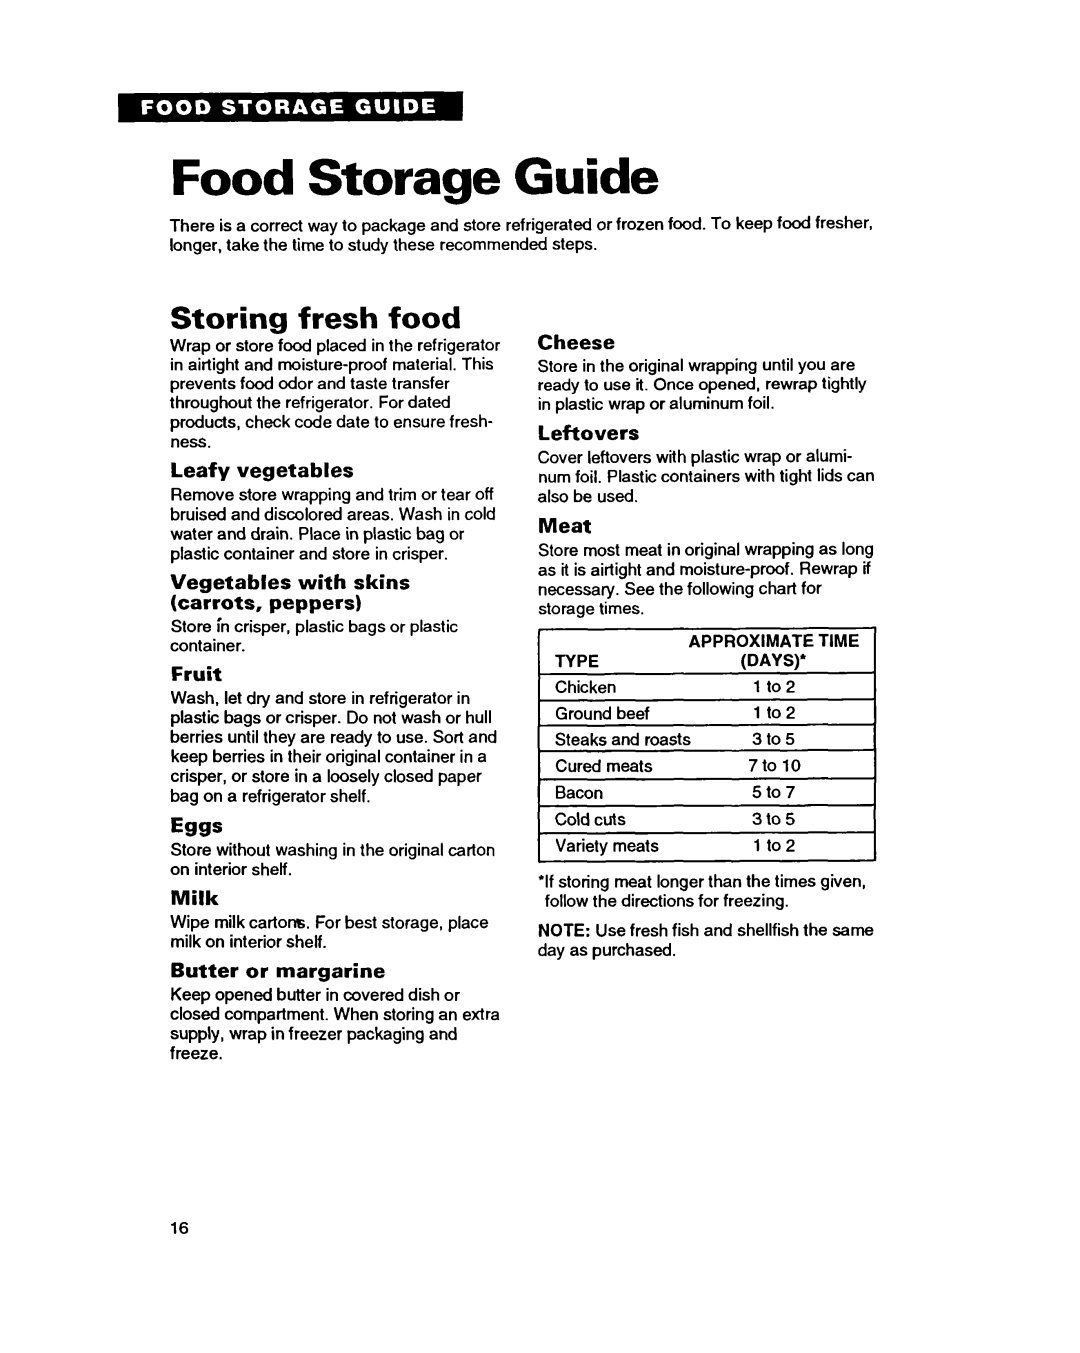 Whirlpool RT14HD Food Storage Guide, Storing fresh food, Leafy vegetables, Vegetables with skins carrots, peppers, Fruit 